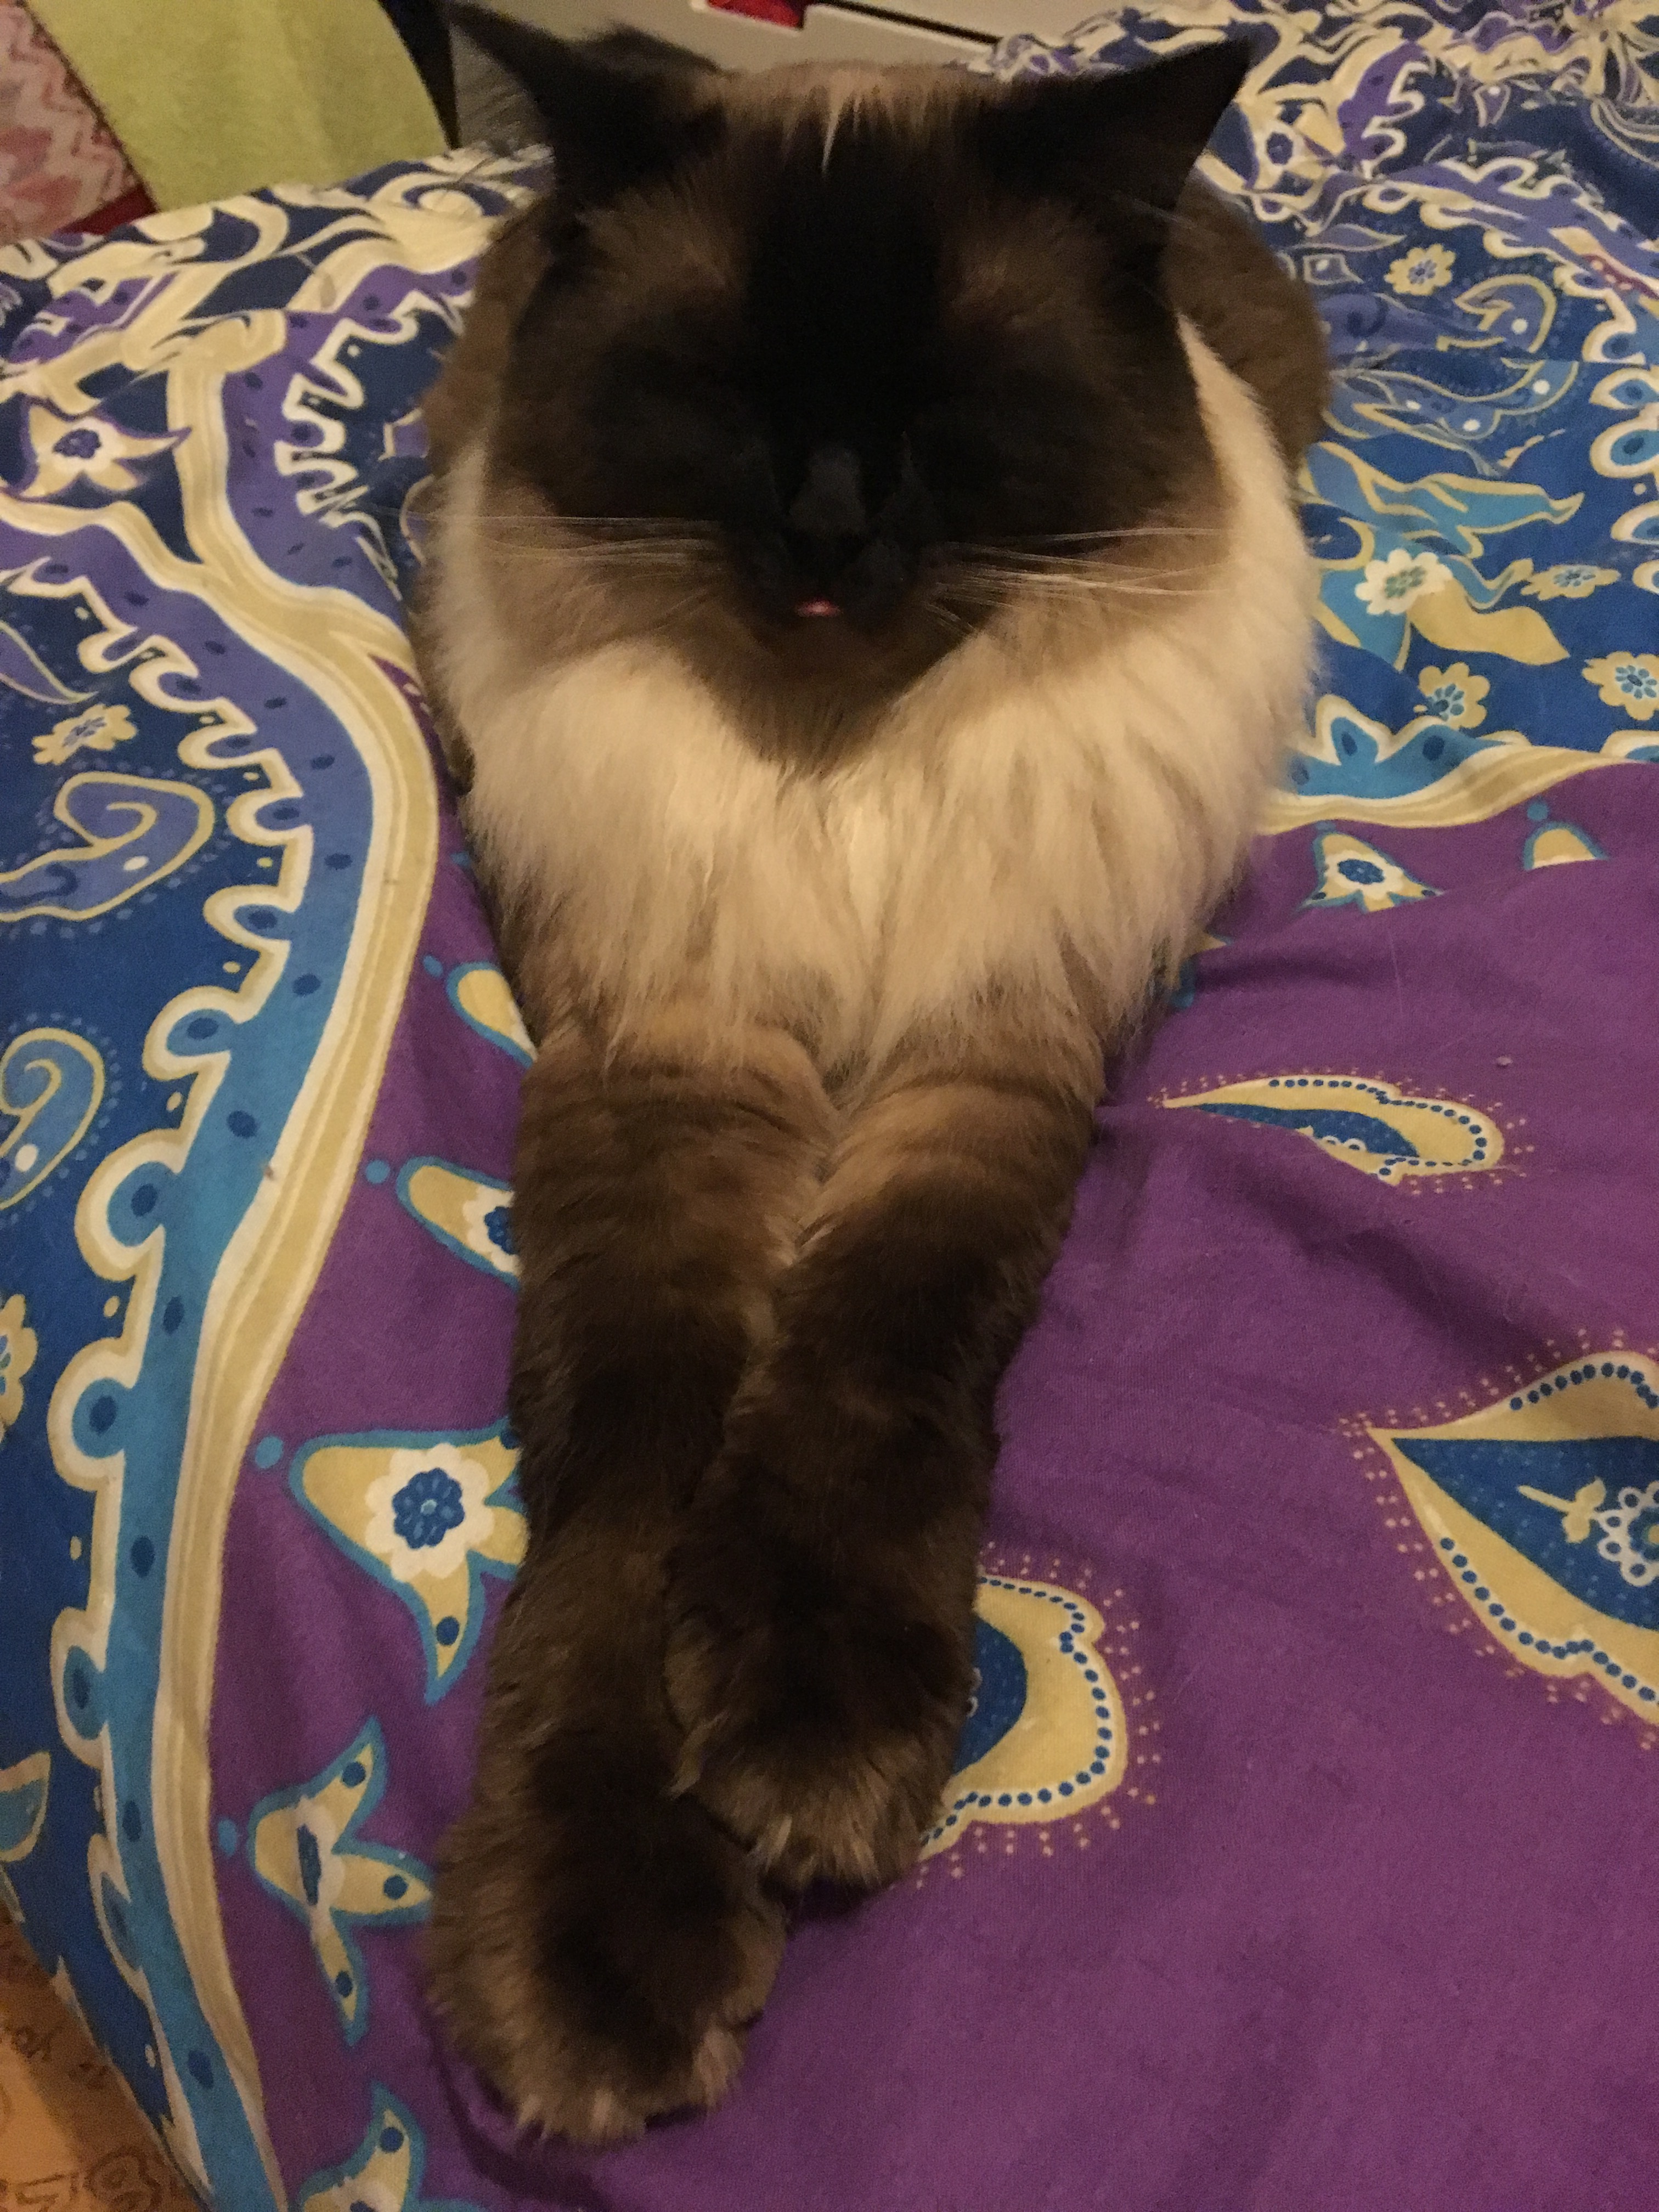 D paws and tongue 2018.jpg